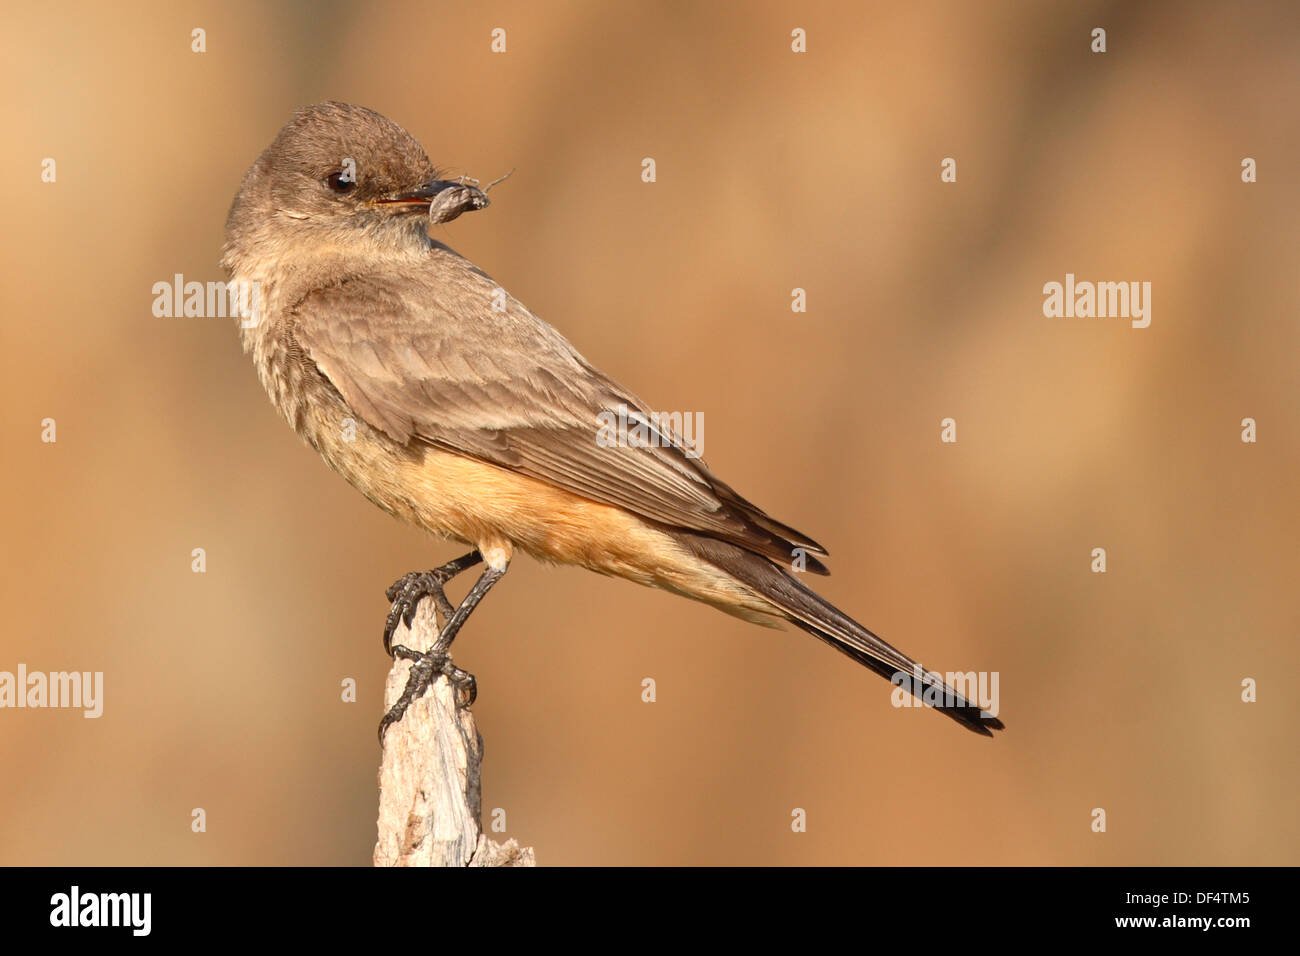 A Say's Phoebe looking back with a Pillbug grasped in its beak. Stock Photo